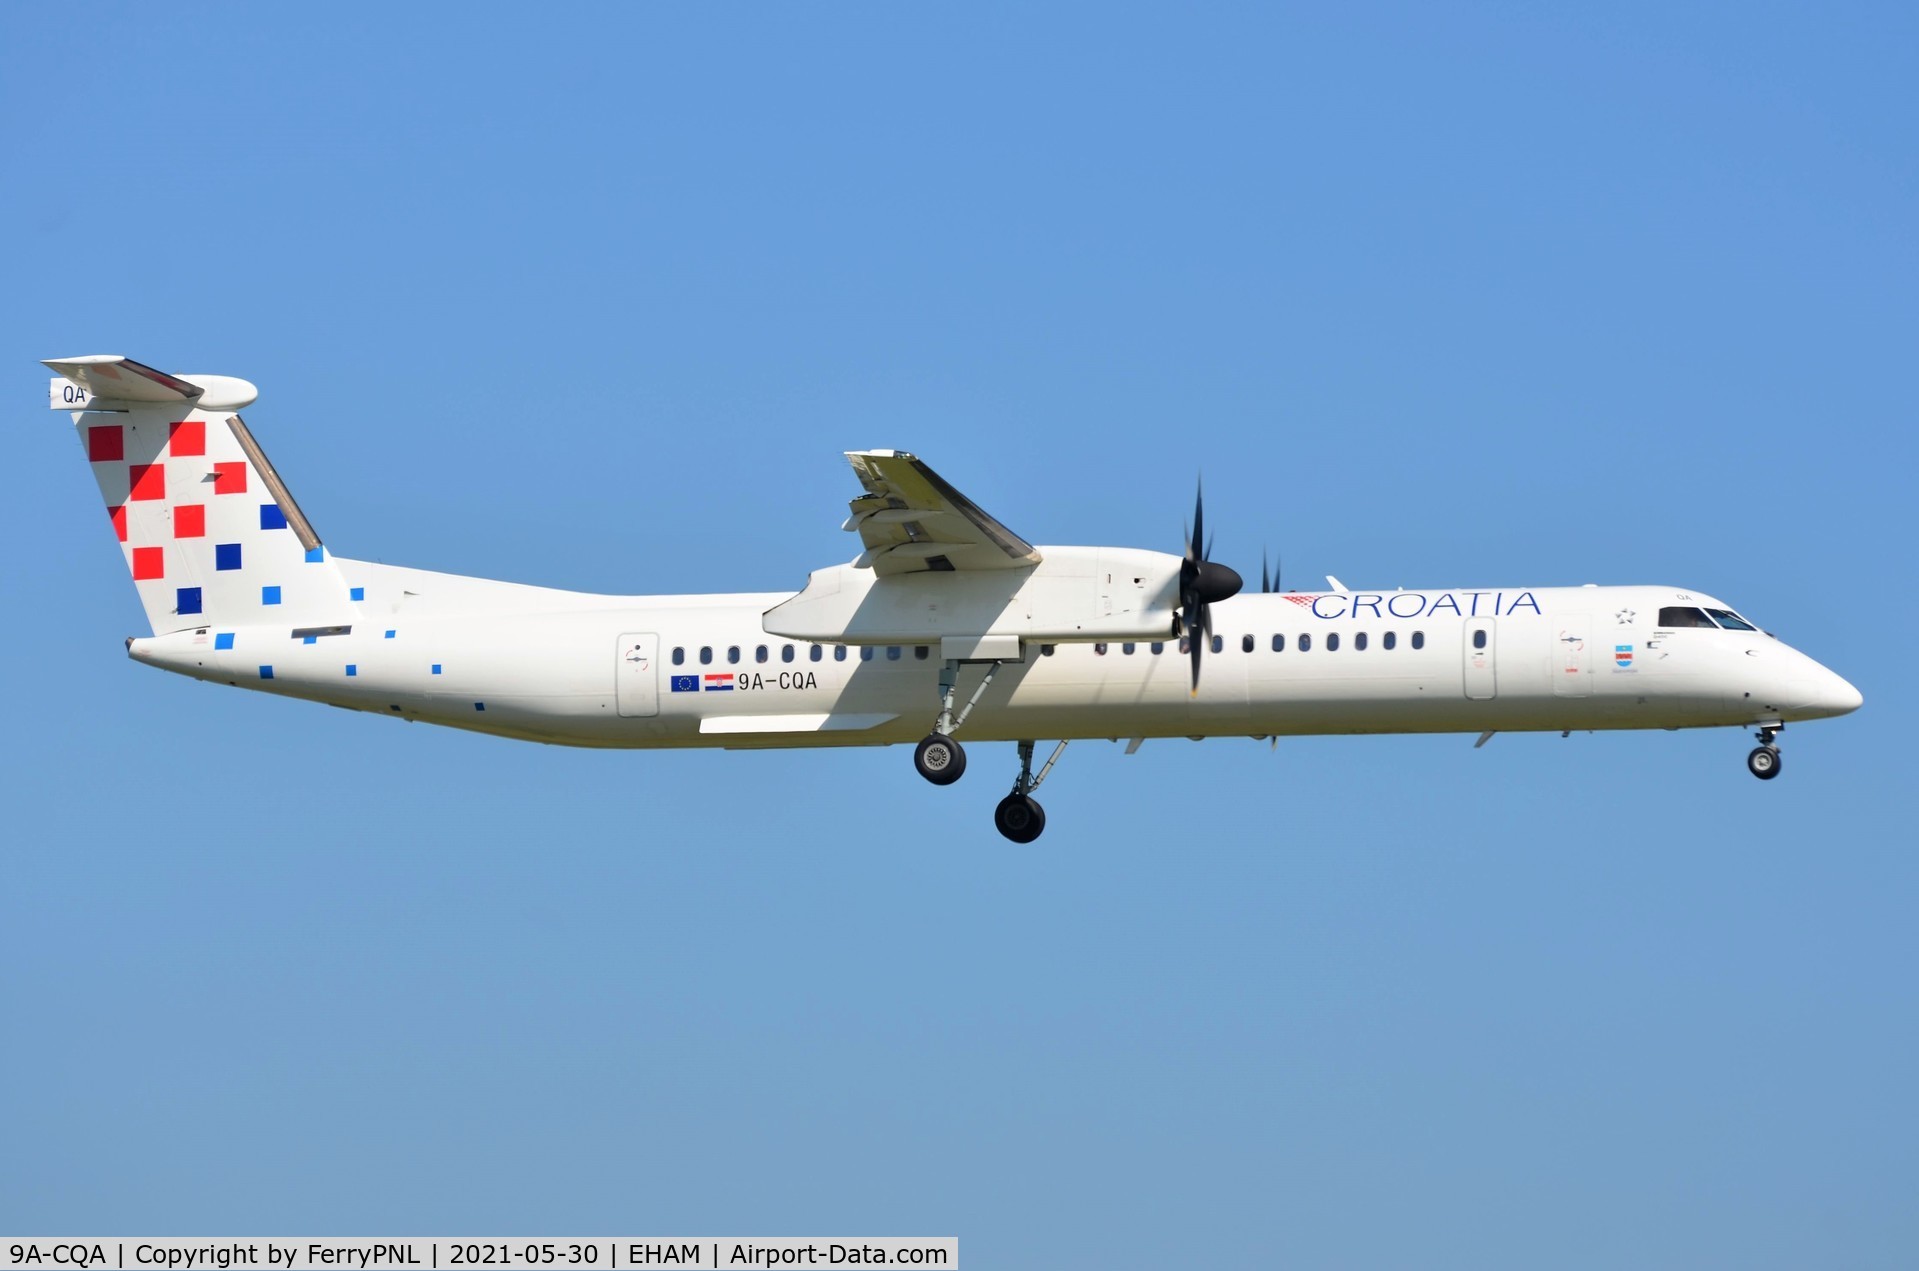 9A-CQA, 2008 De Havilland Canada DHC-8-402Q Dash 8 C/N 4205, Croatia DHC8 was the only turbo-prop this morning in AMS